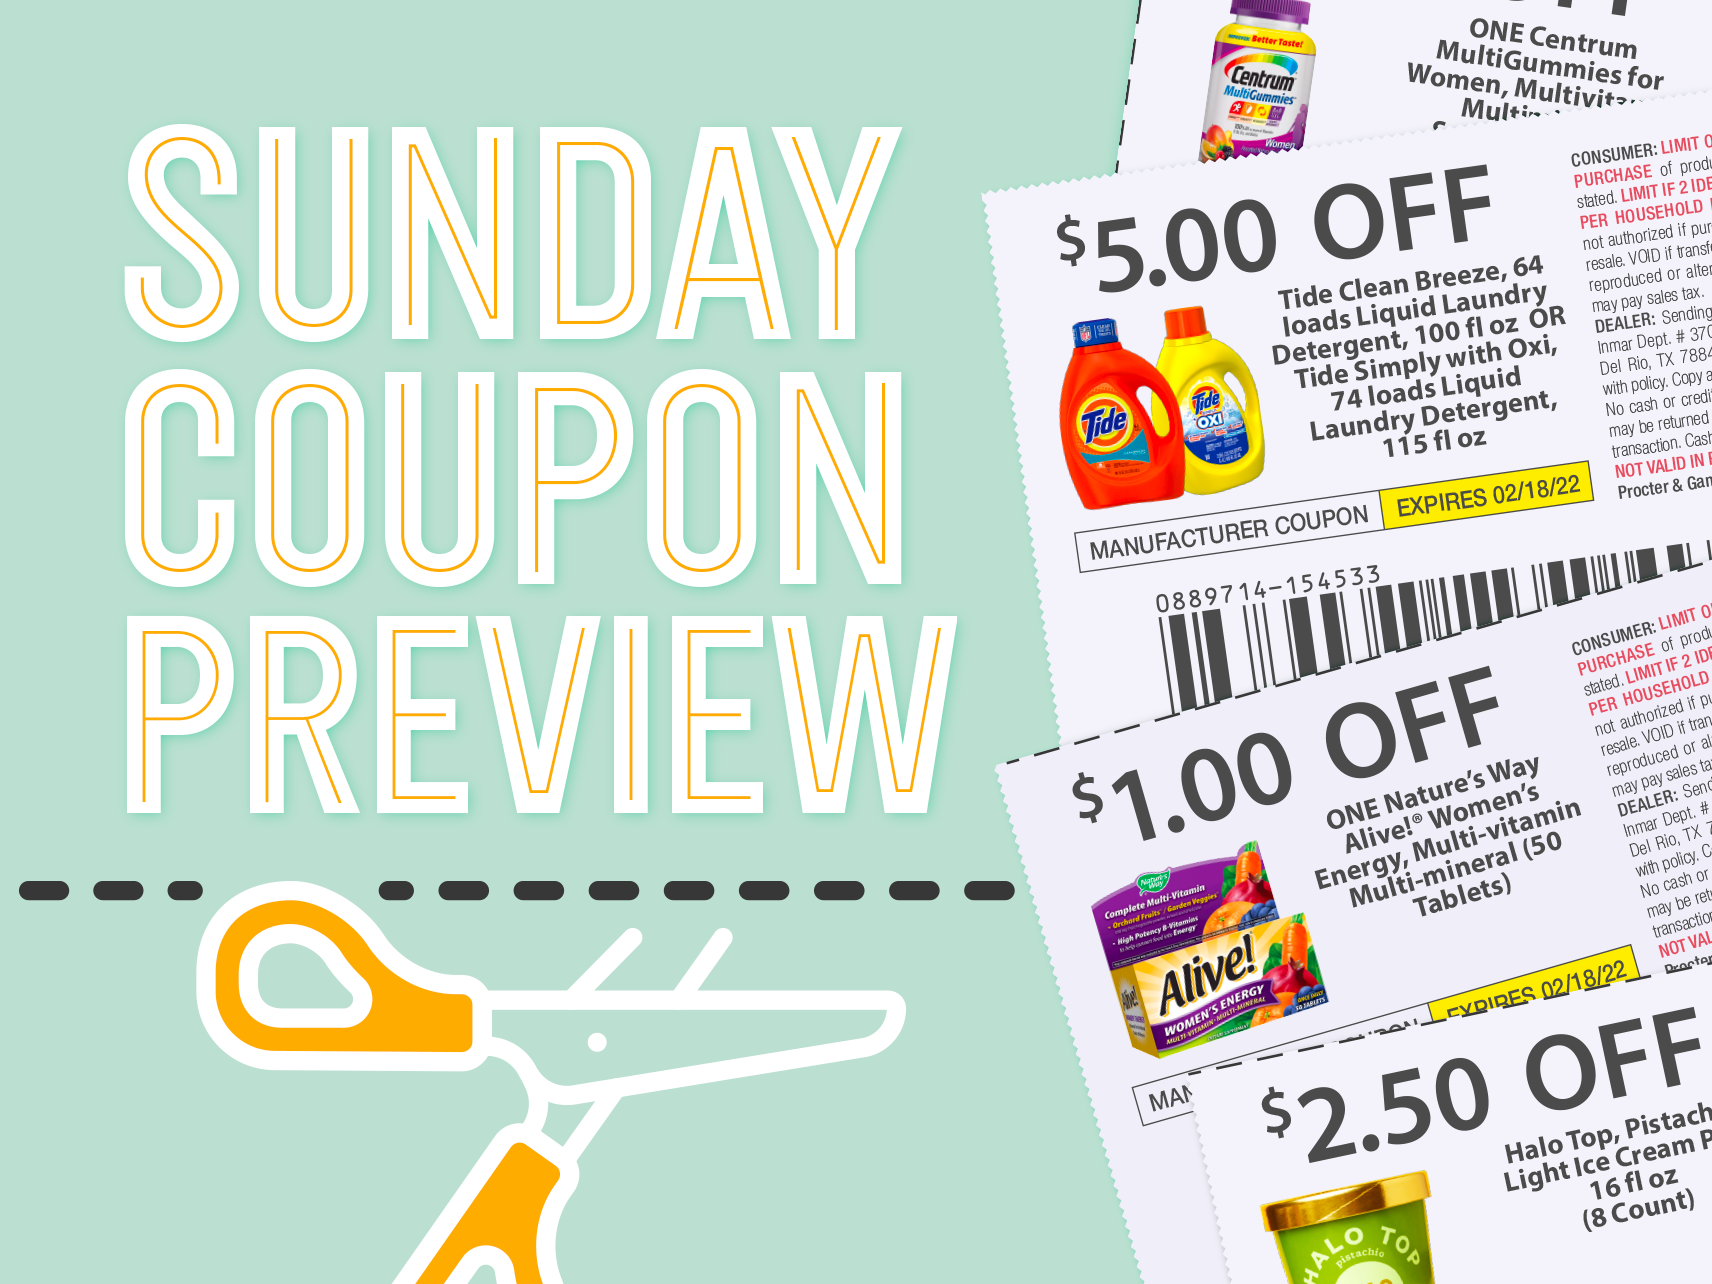 Sunday Coupon Preview For 2/25 – Two Inserts